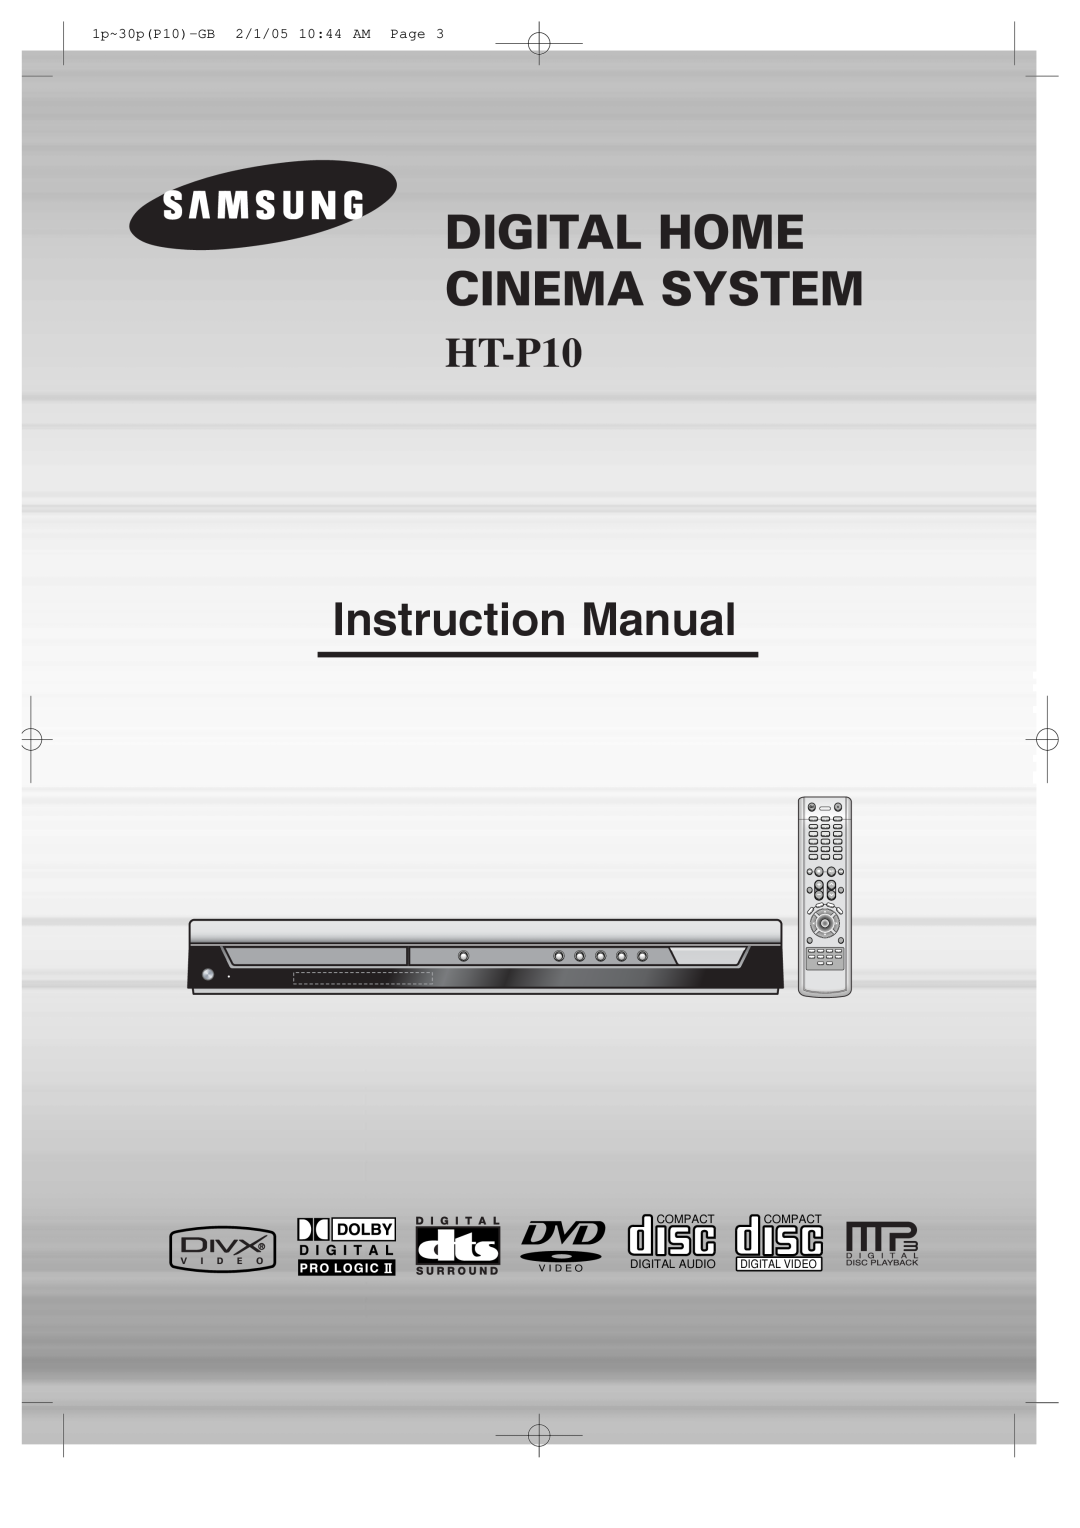 Samsung instruction manual Digital Home Cinema System, HT-P10, 1p~30pP10-GB2/1/05 10 44 AM Page, Compact Compact 